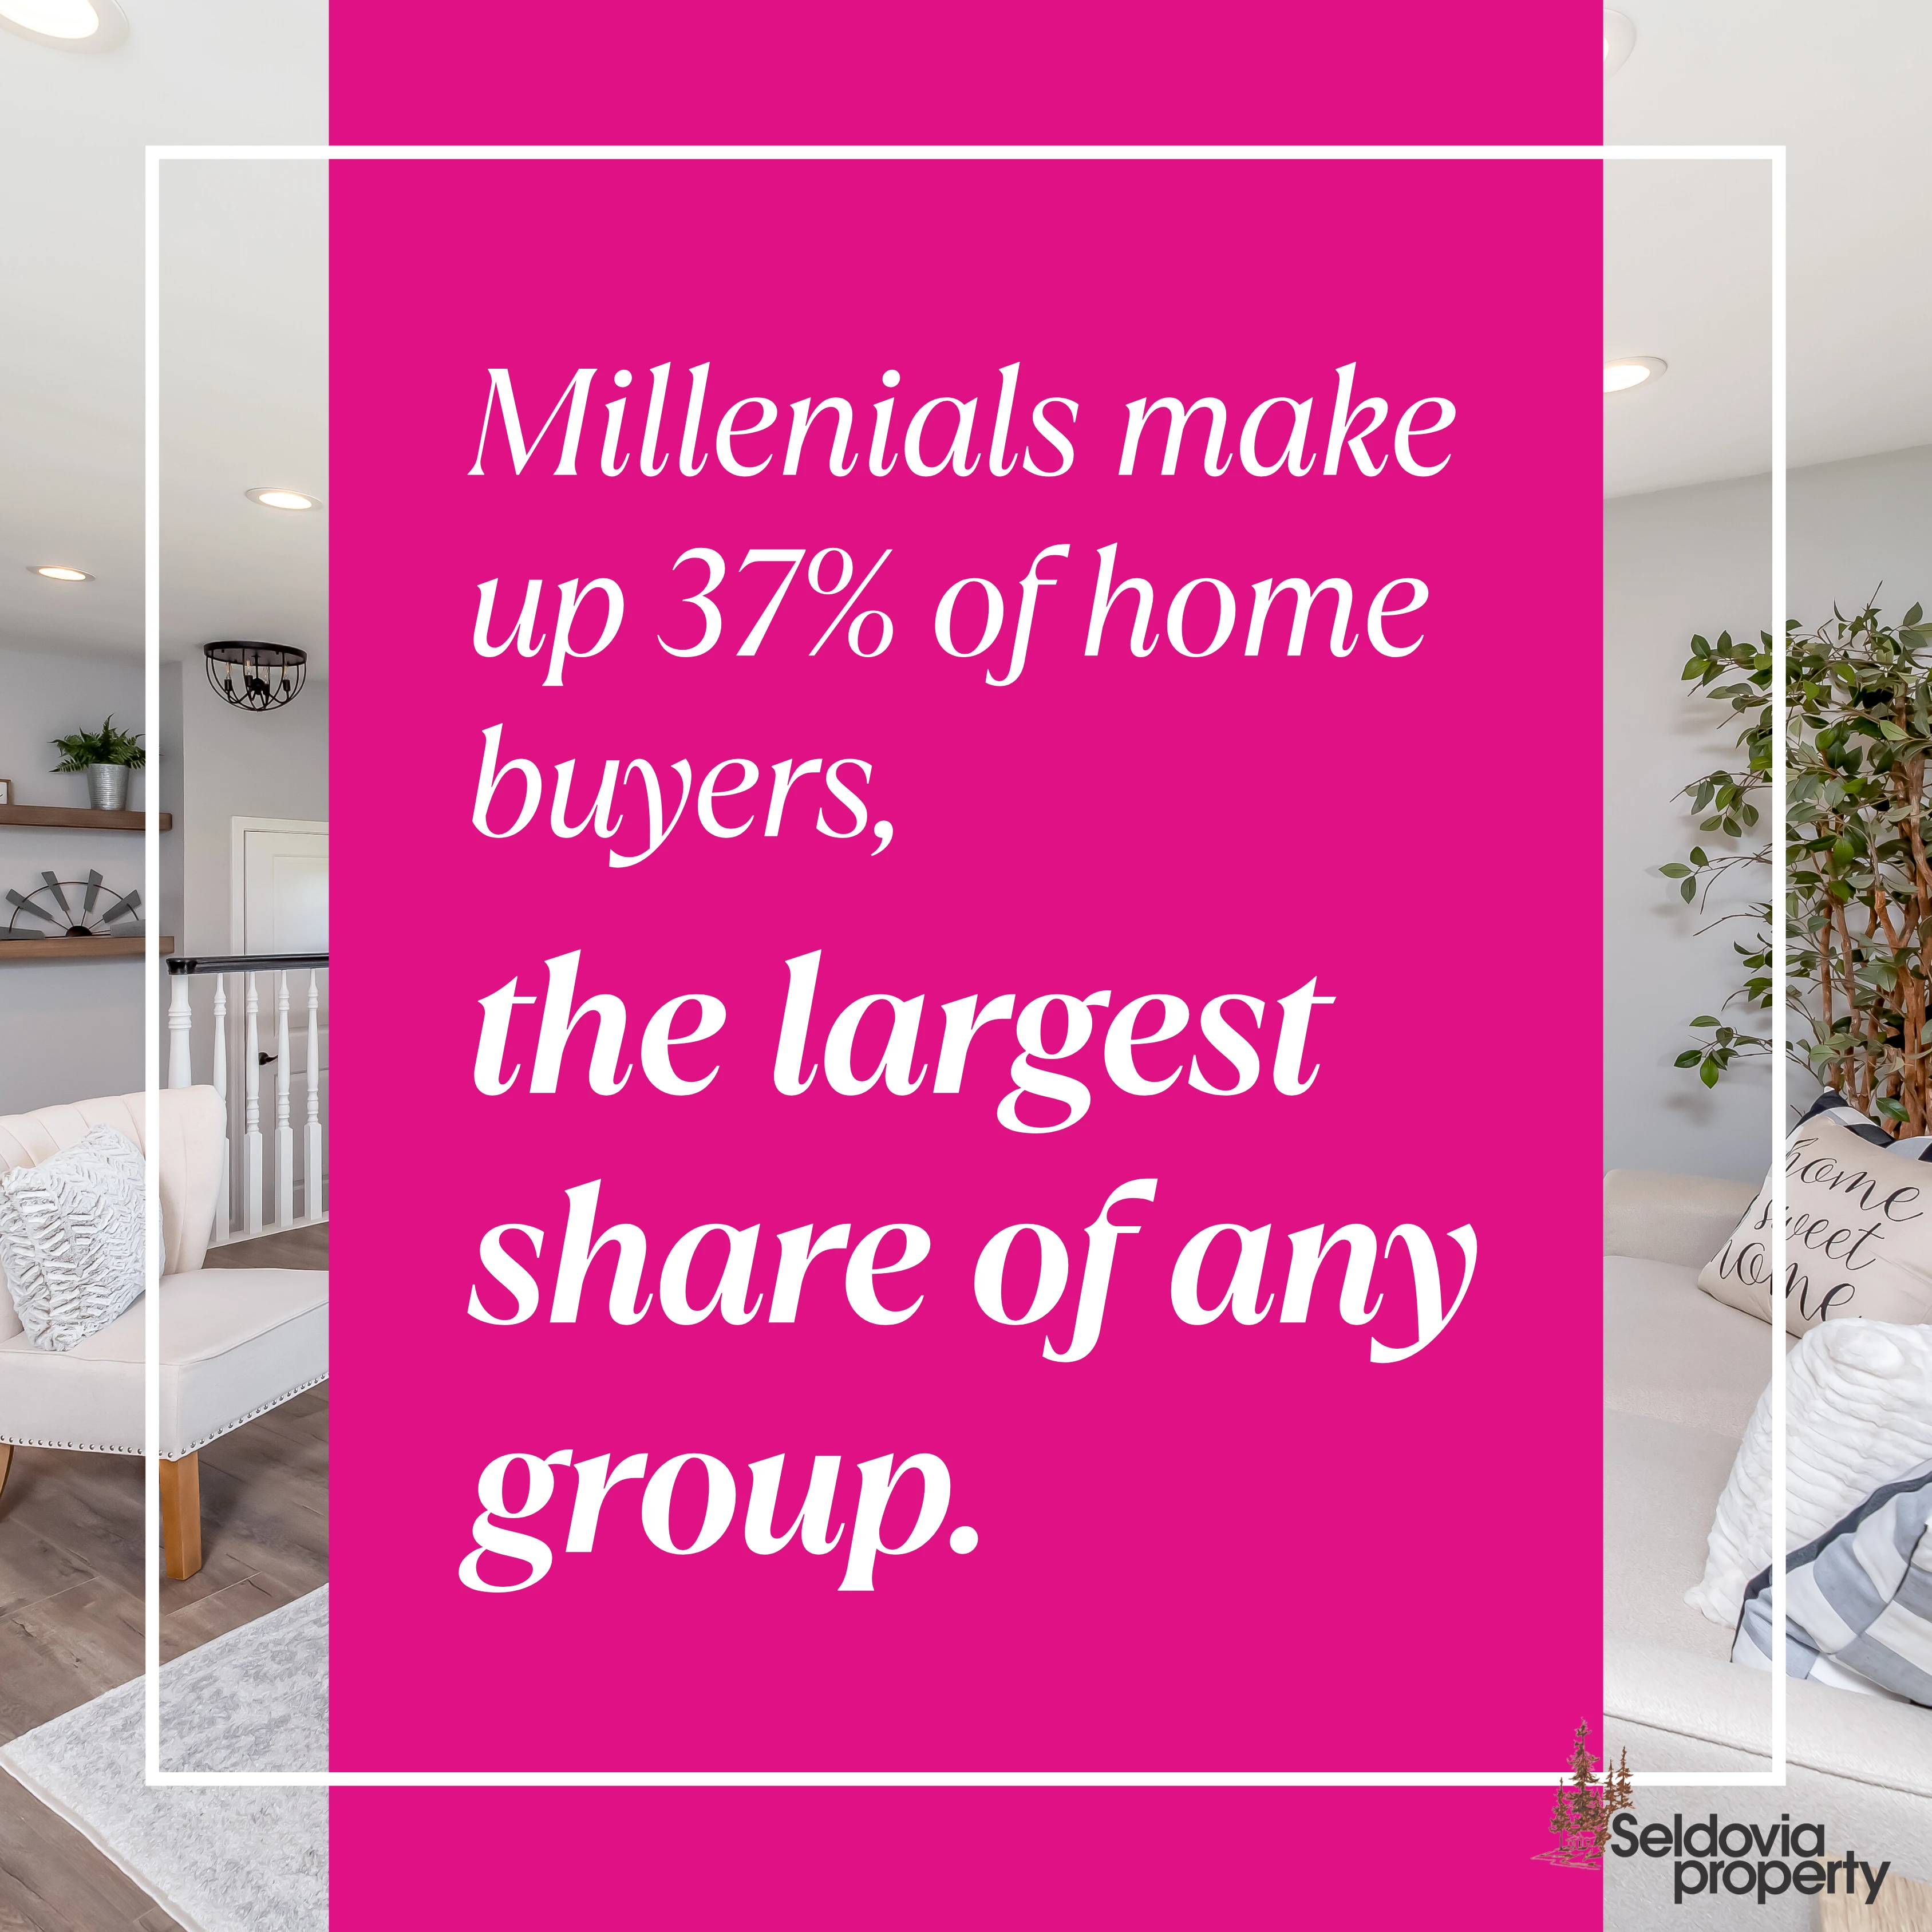 Millenials make up 37% of home buyers, the largest share of any group